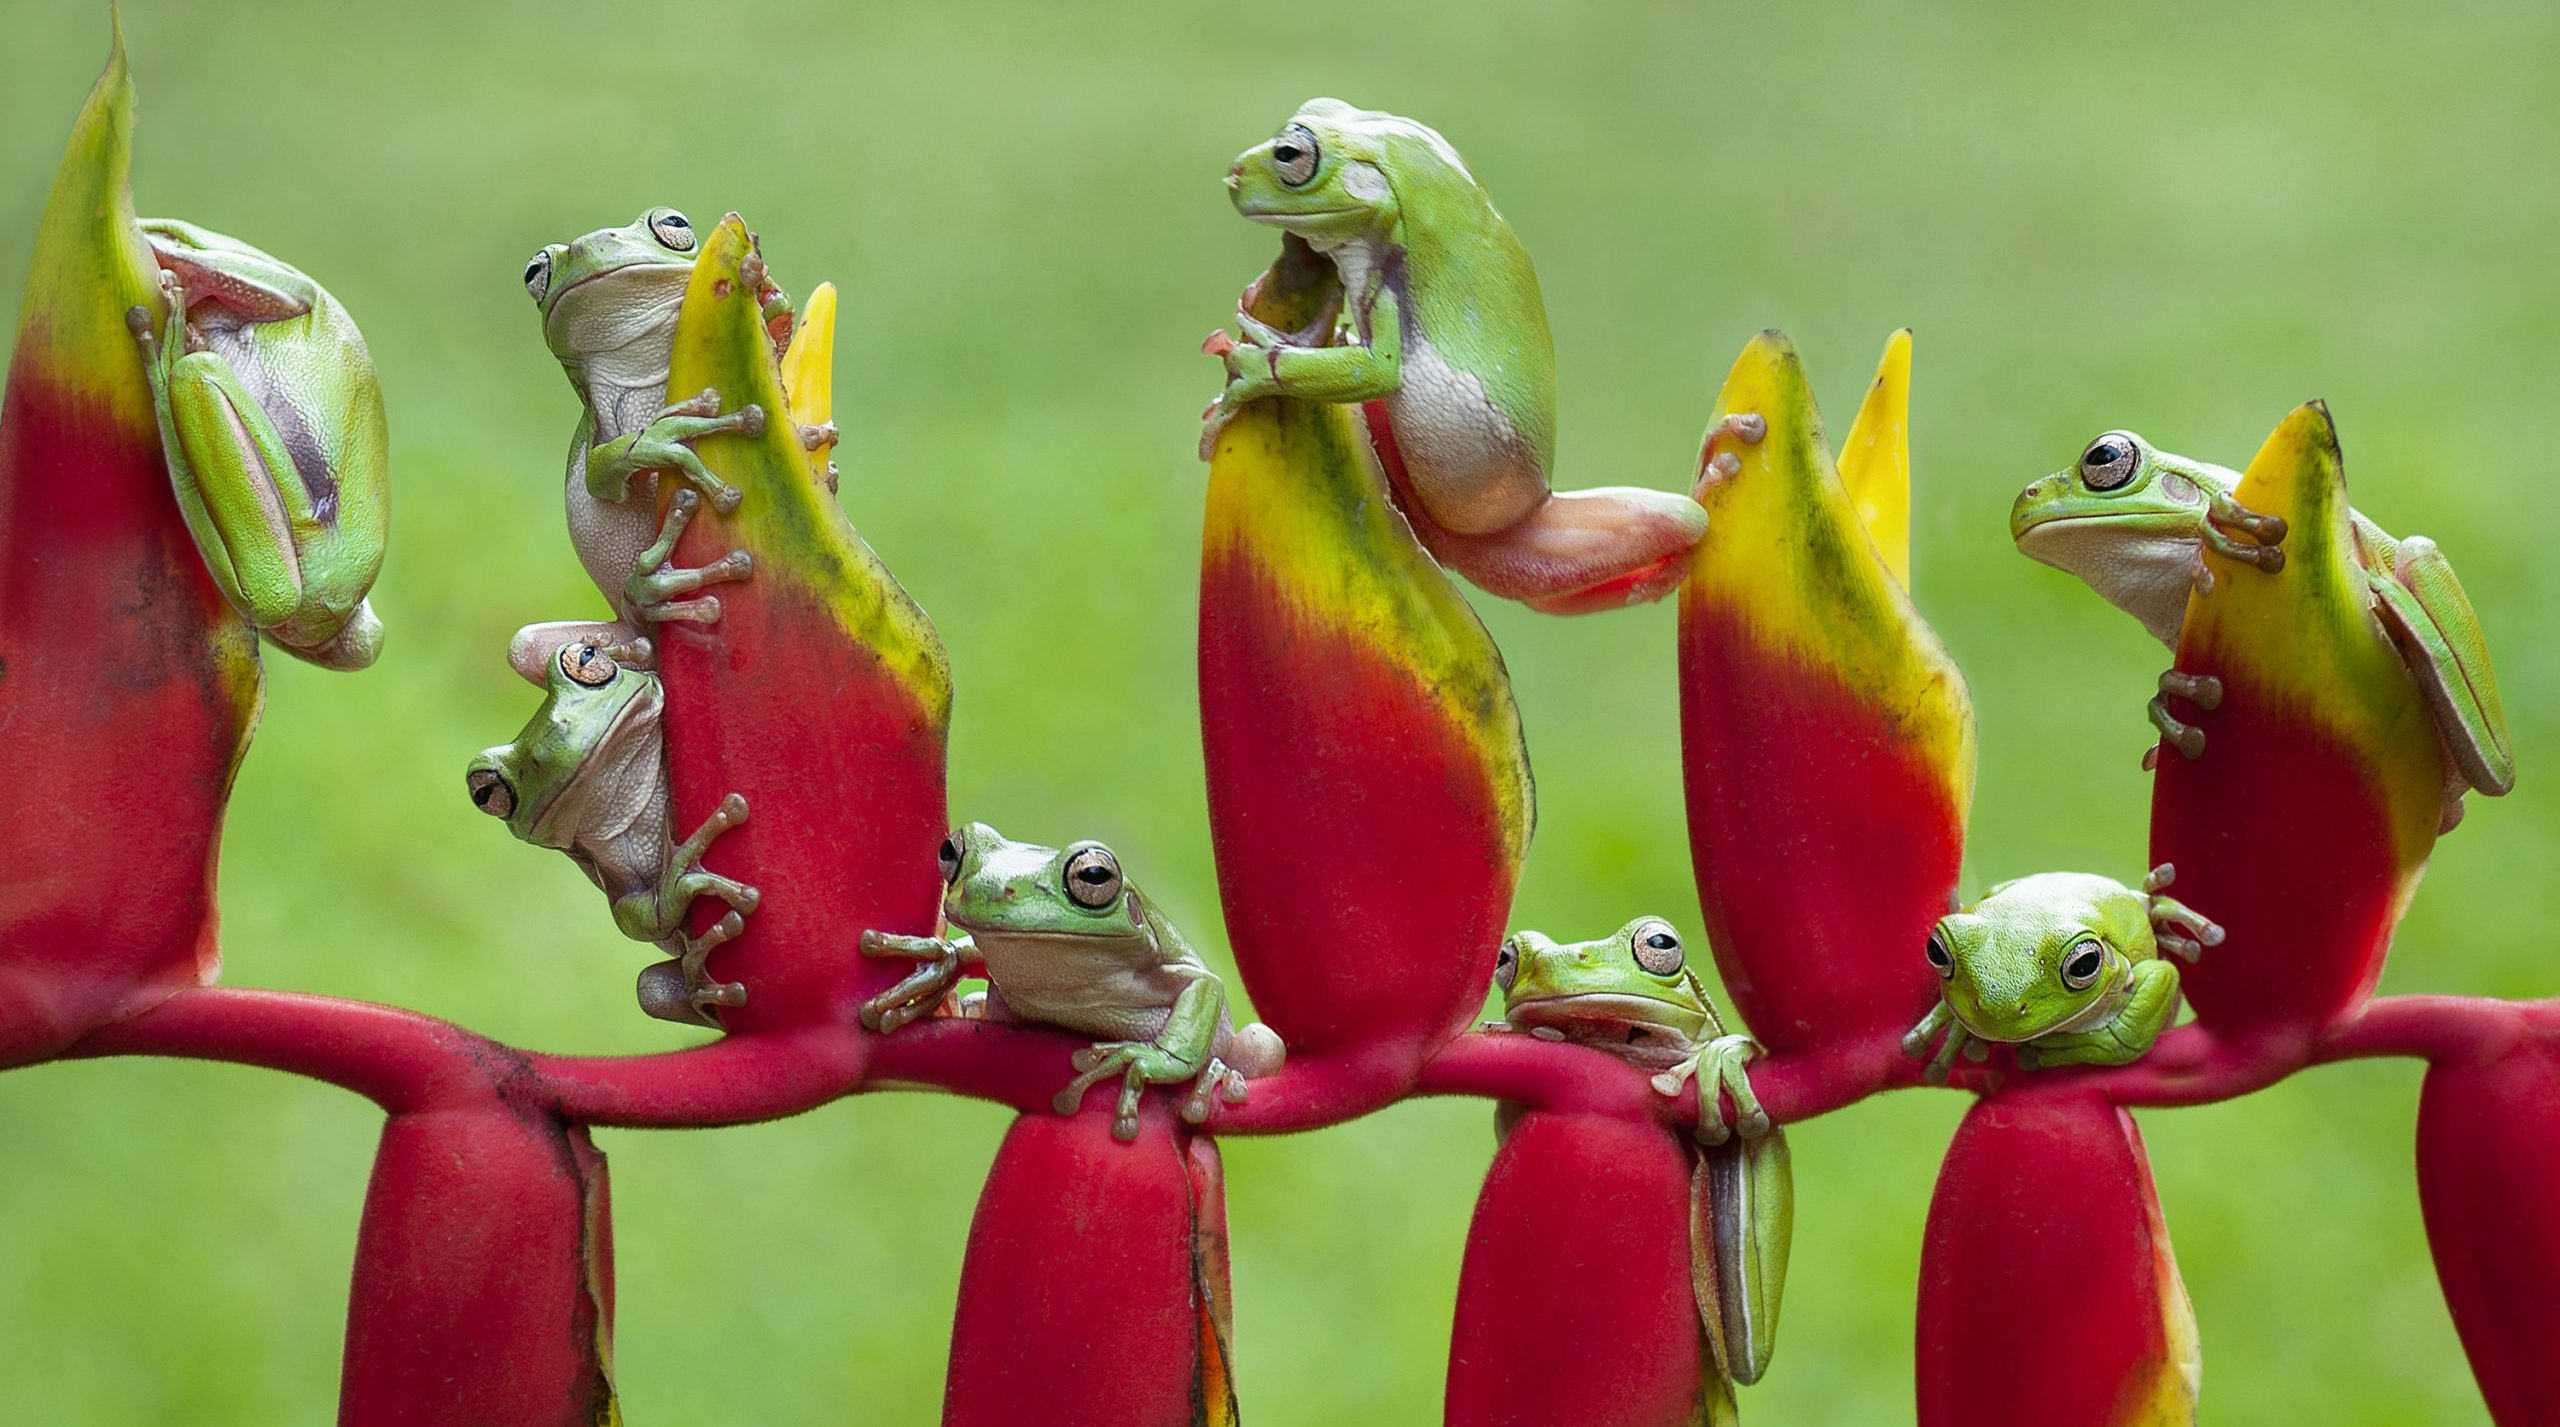 tree-frogs-flying-frogs-on-heliconia-2021-08-28-22-10-21-utc